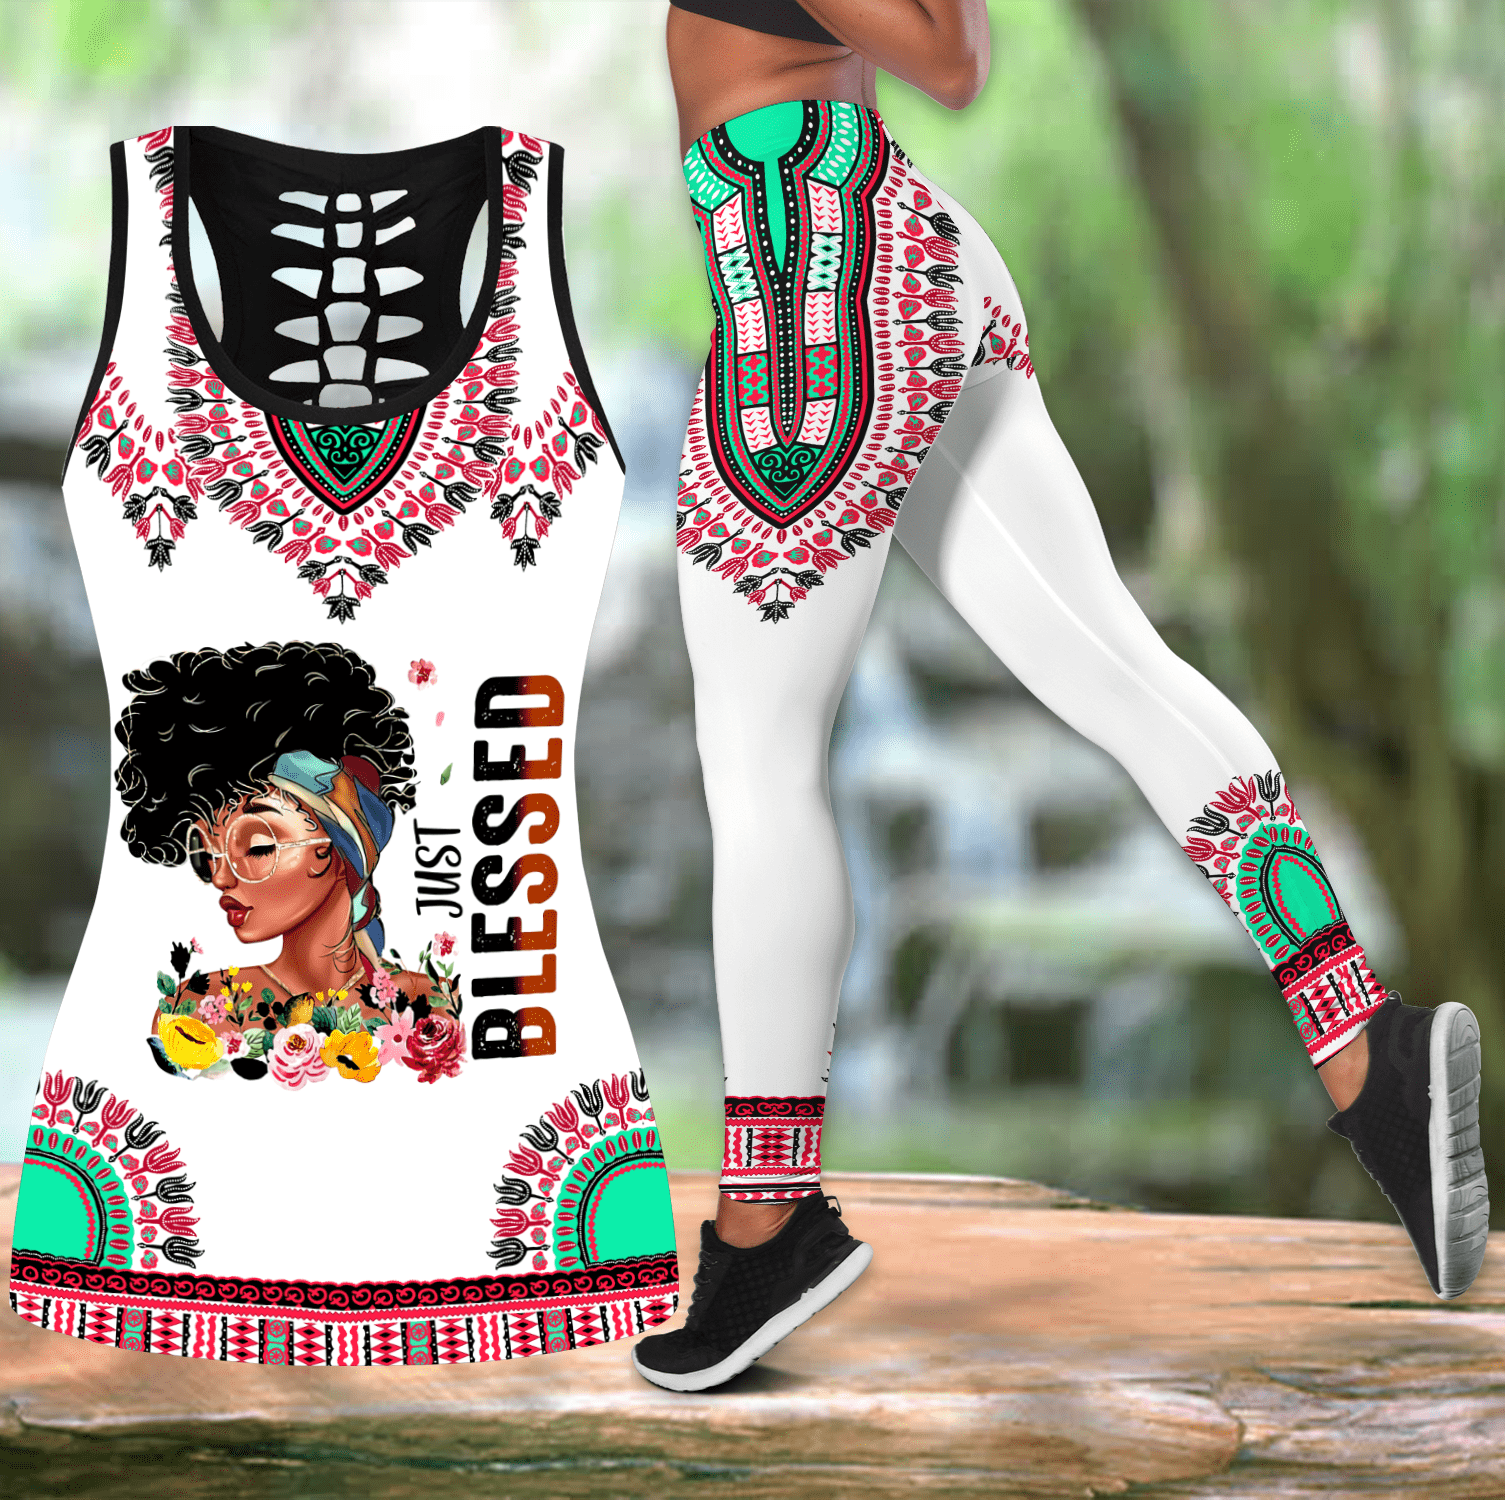 African Culture Legging & Tank top Just Bless Black Girl